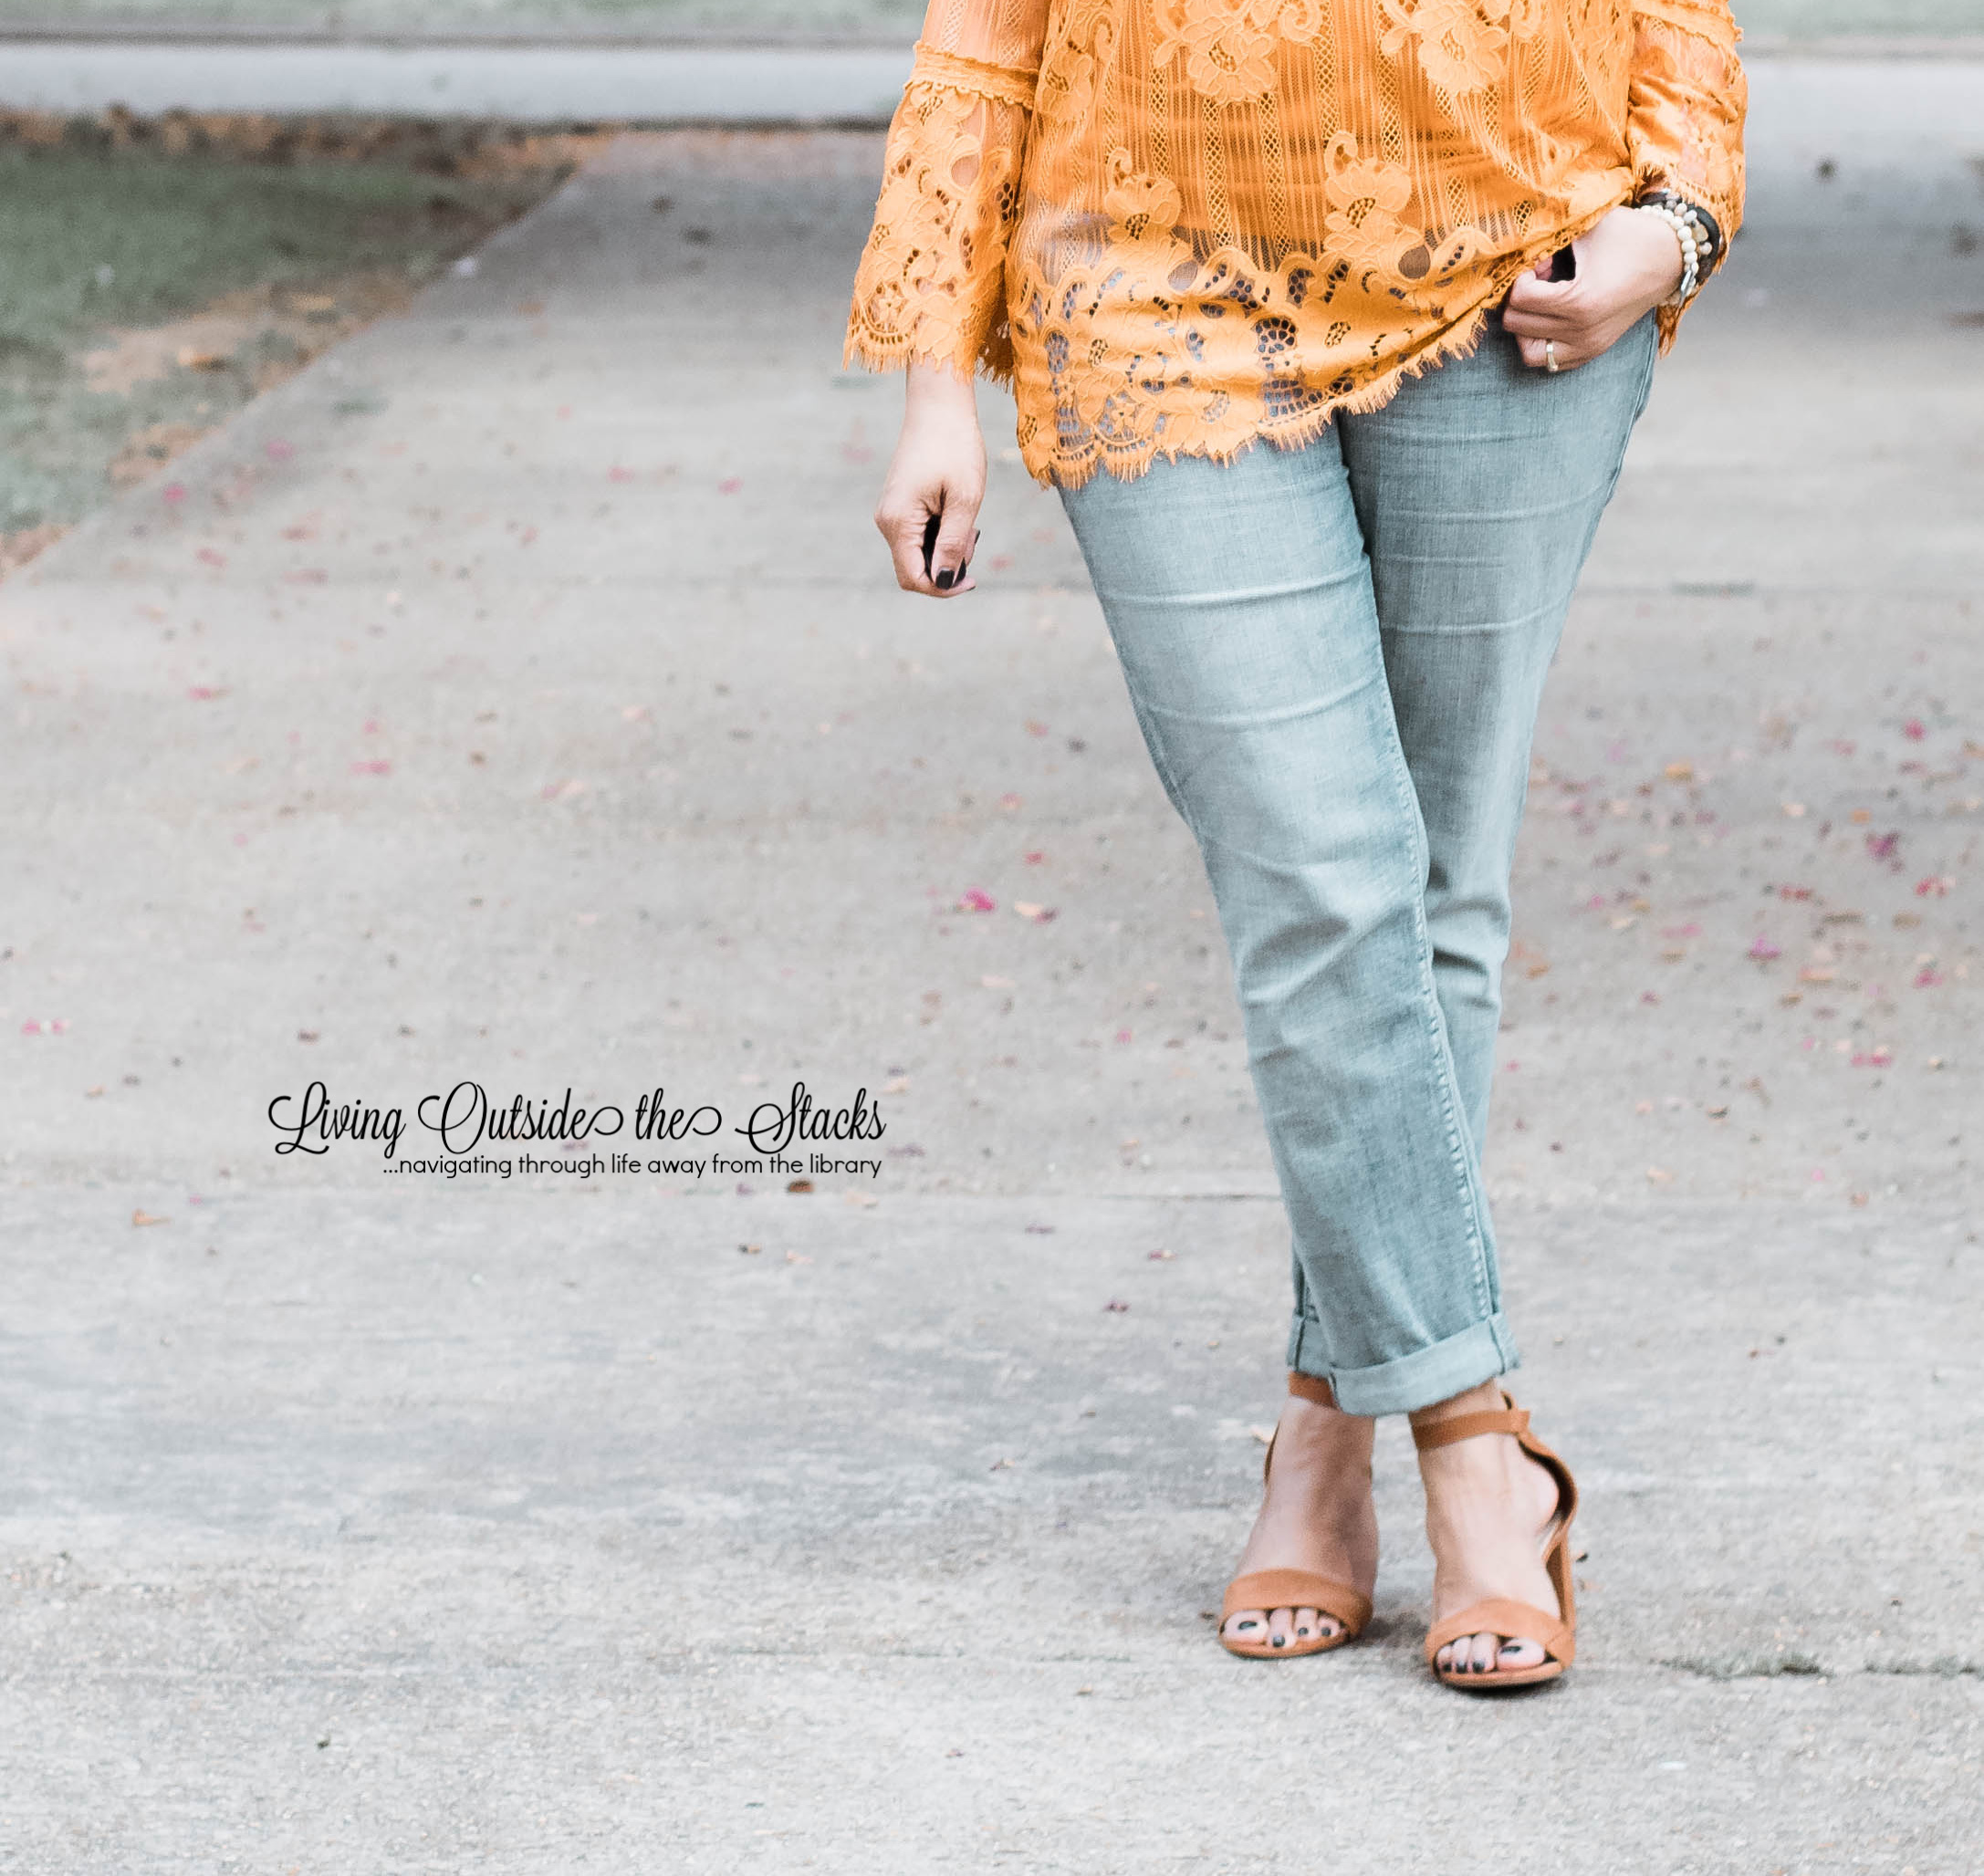 gold lace top with boyfriend jeans and brown sandals {living outside the stacks}